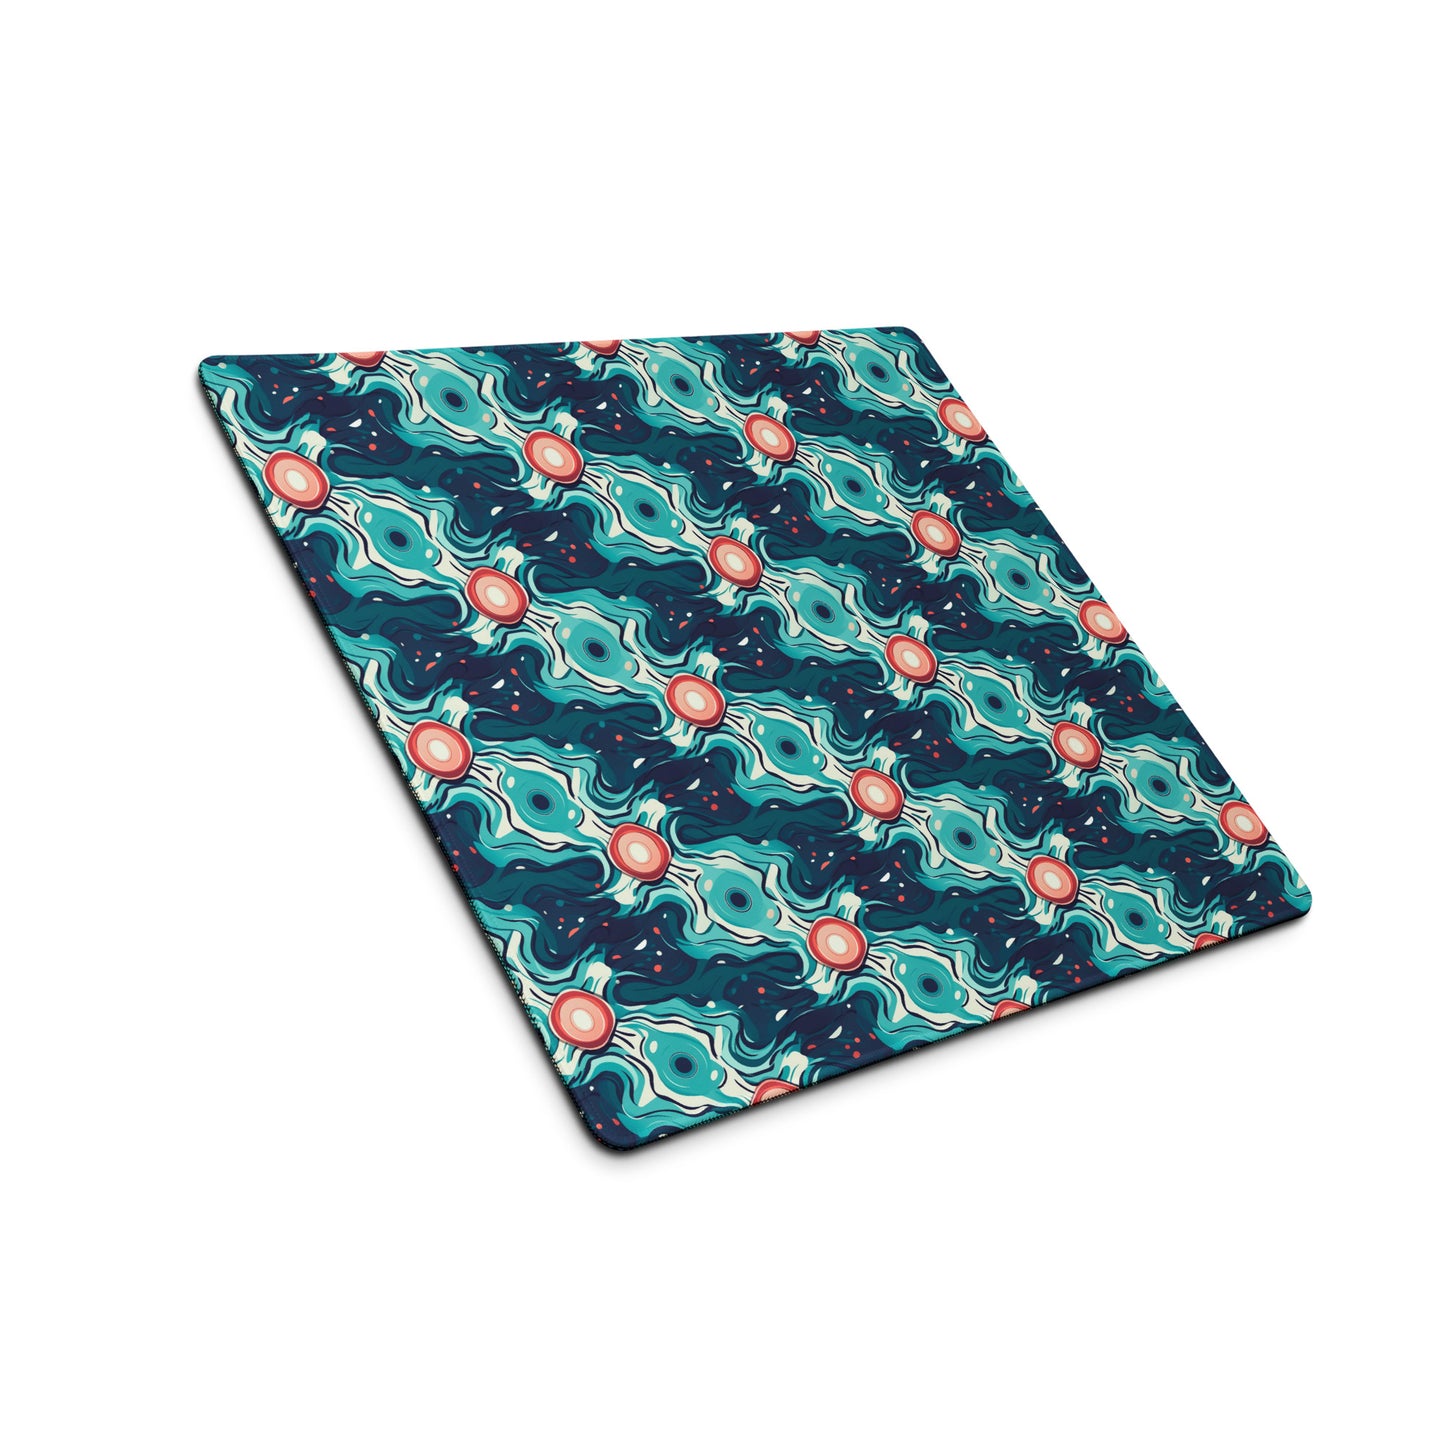 A 18" x 16" desk pad with a teal abstract wavy pattern sitting at an angle.